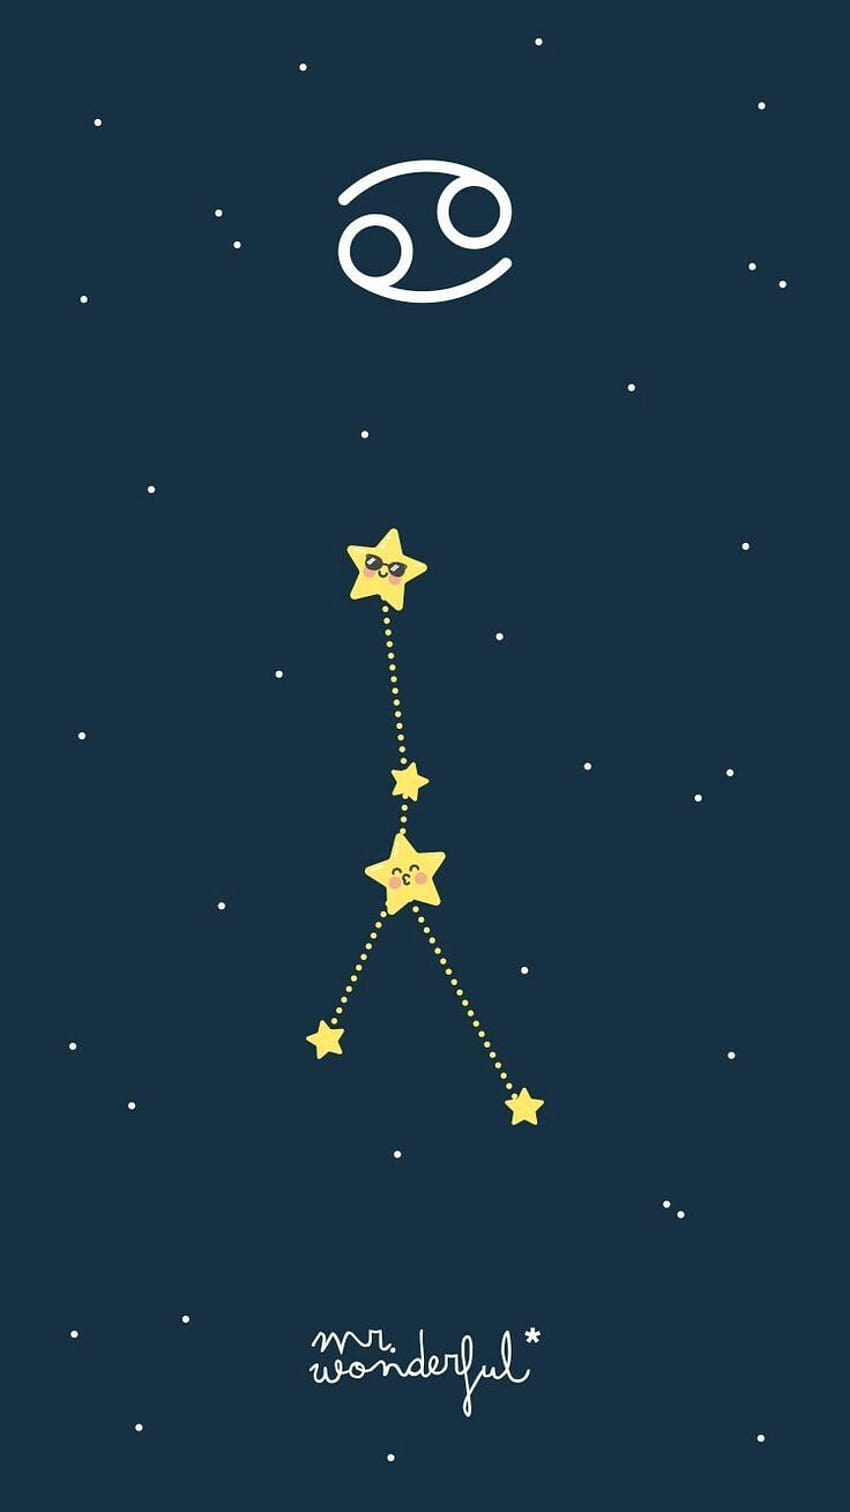 Wallpaper with cancer zodiac sign, cute illustration of stars, on a dark blue background with white stars - Cancer